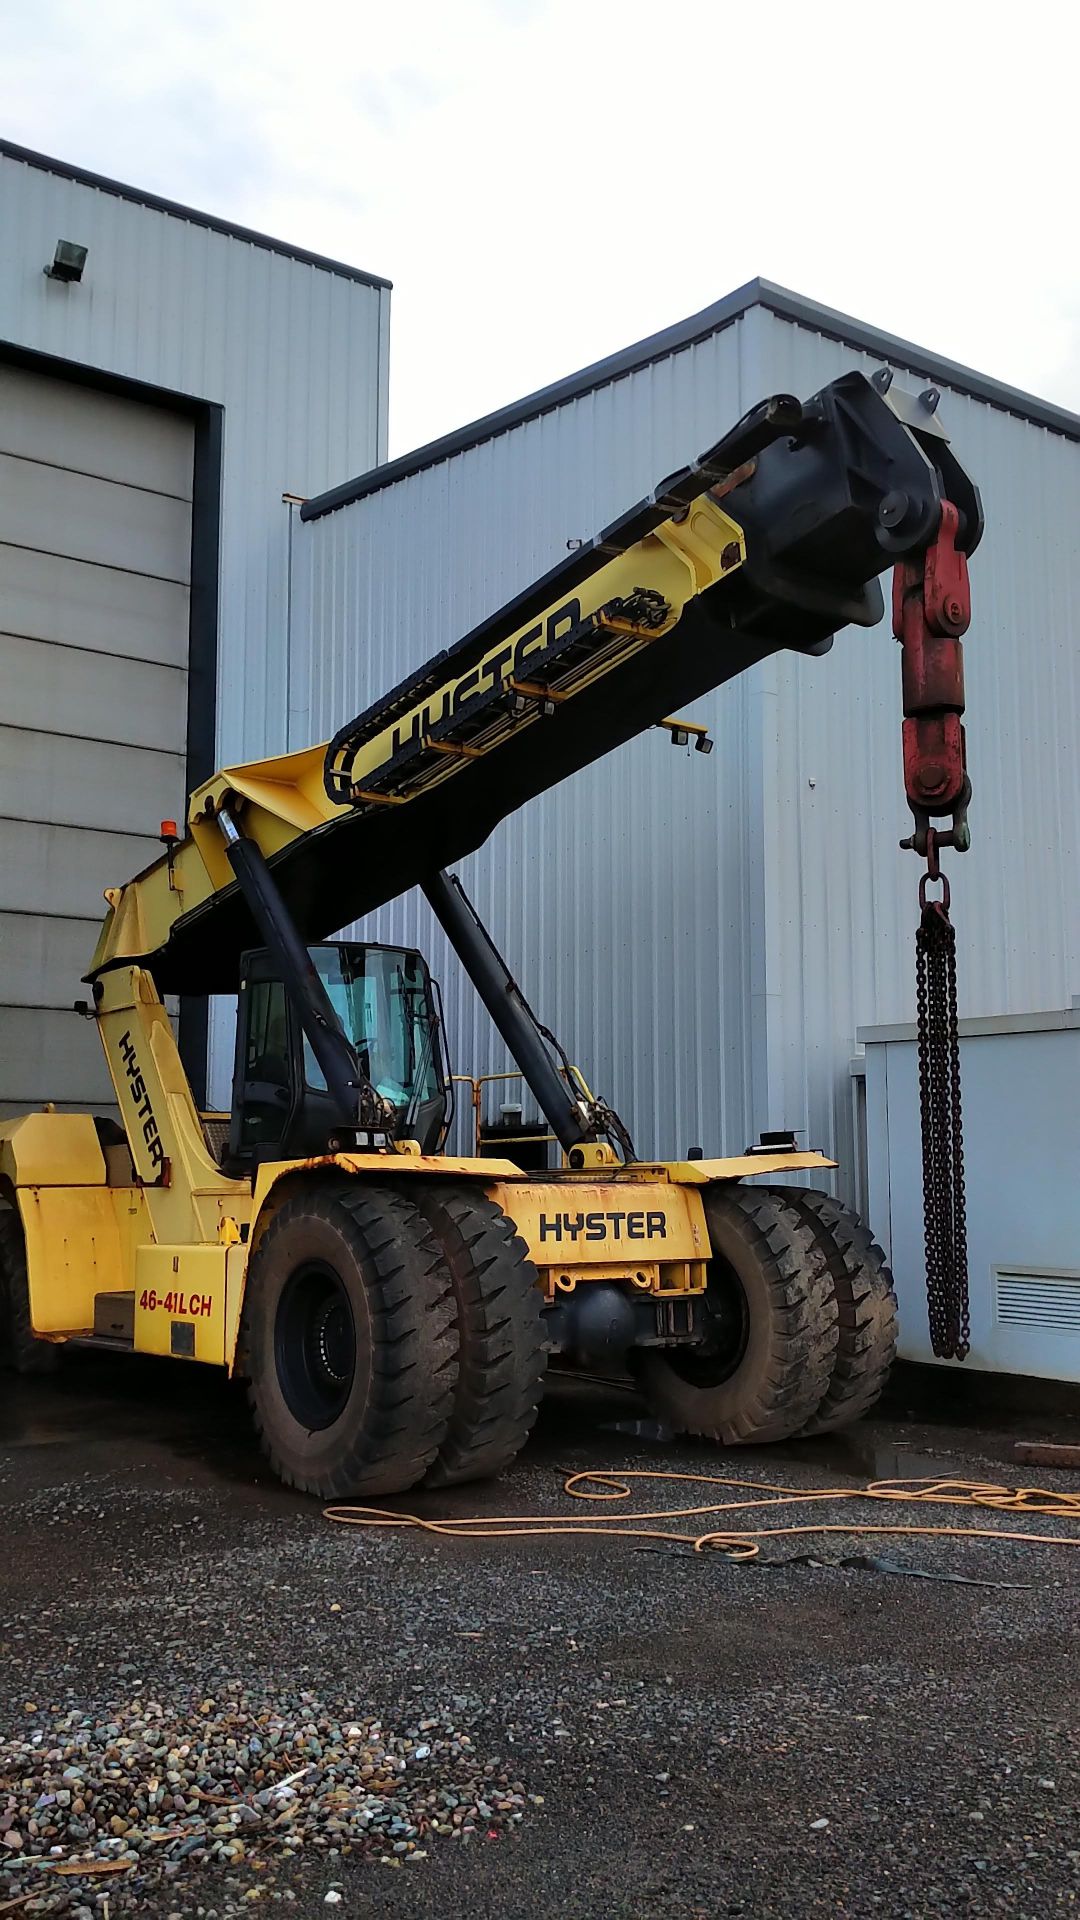 Hyster RS46 -41L CH Reachstacker, Serial No. C222E01543K, YOM 2012 - Image 7 of 9